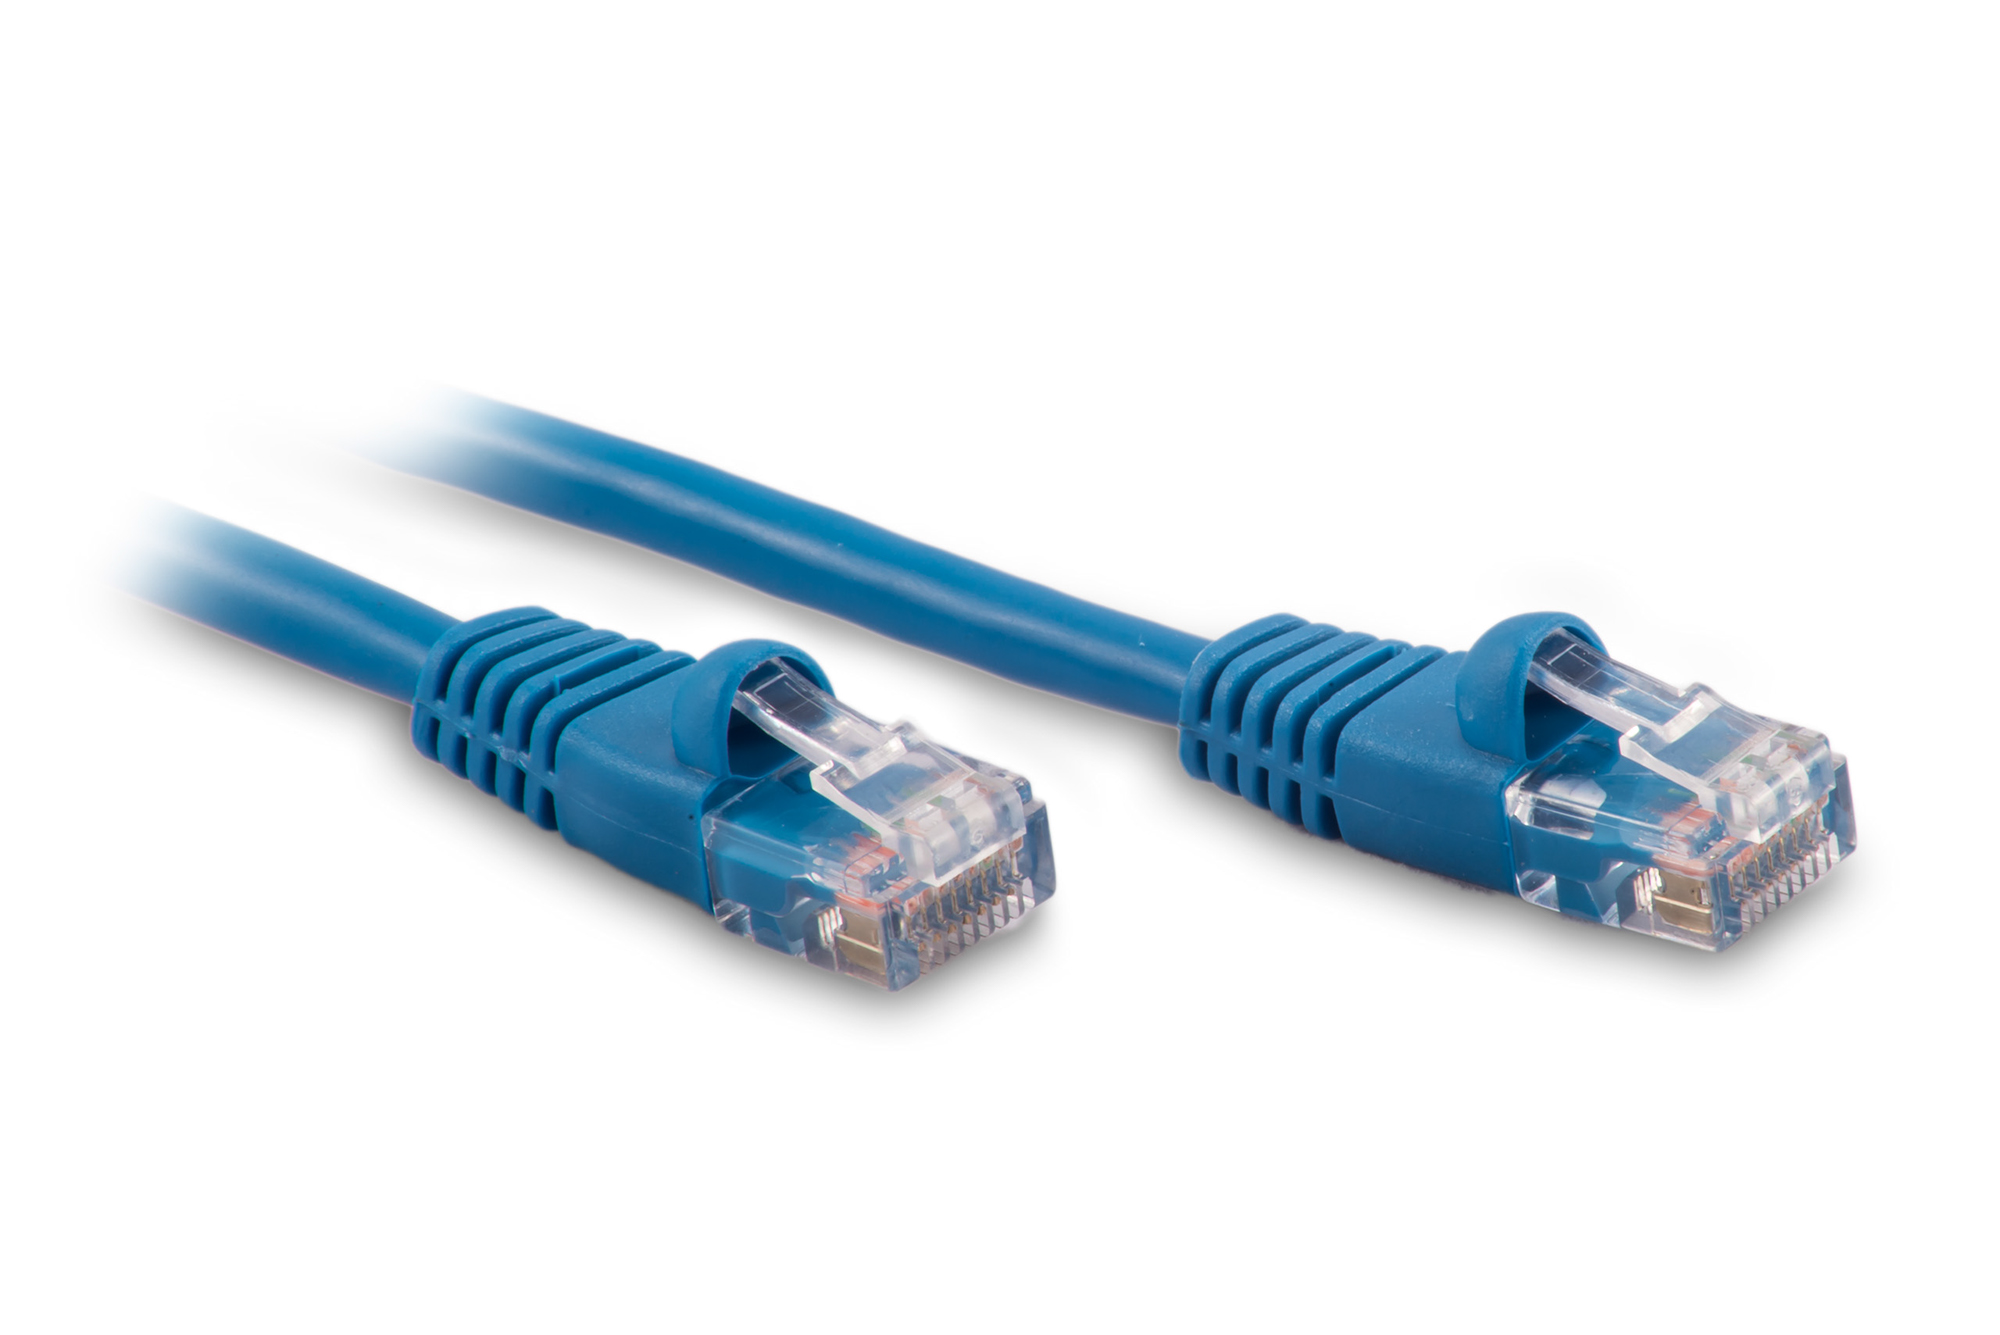 75ft Cat6 Ethernet Patch Cable - Blue Color - Snagless Boot